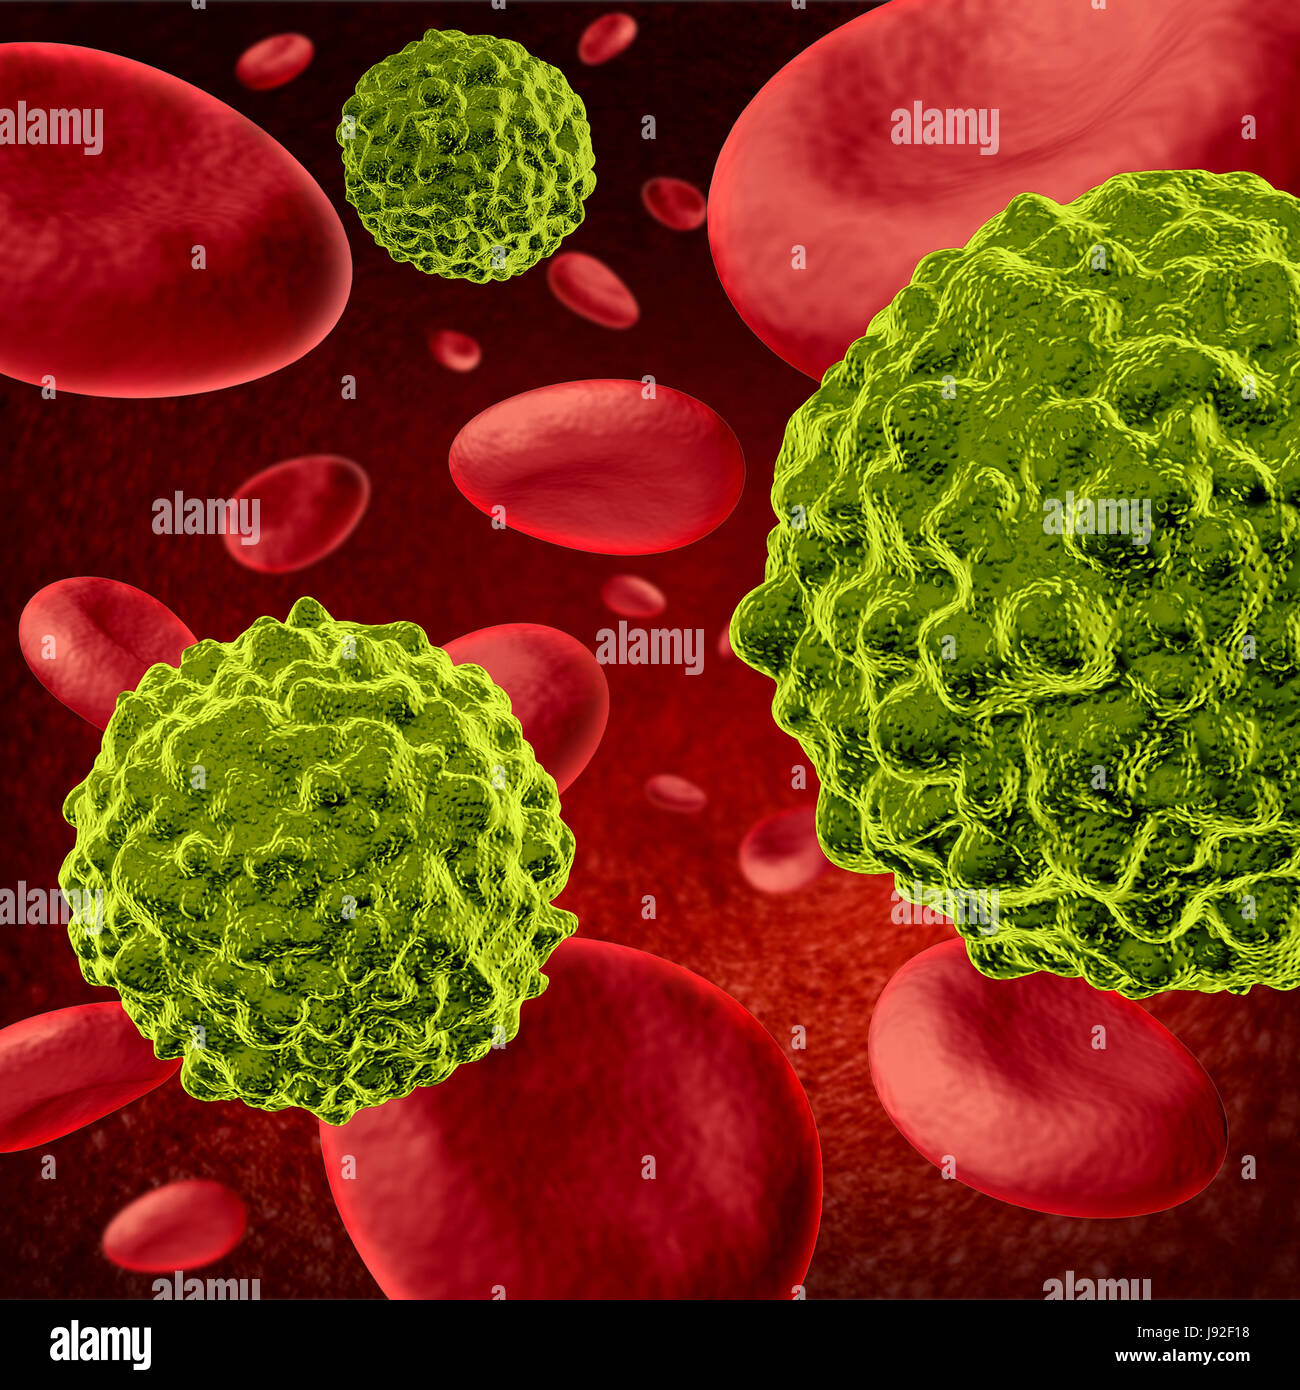 medicinally, medical, human, human being, blood, virus, cancer, growth, means, Stock Photo